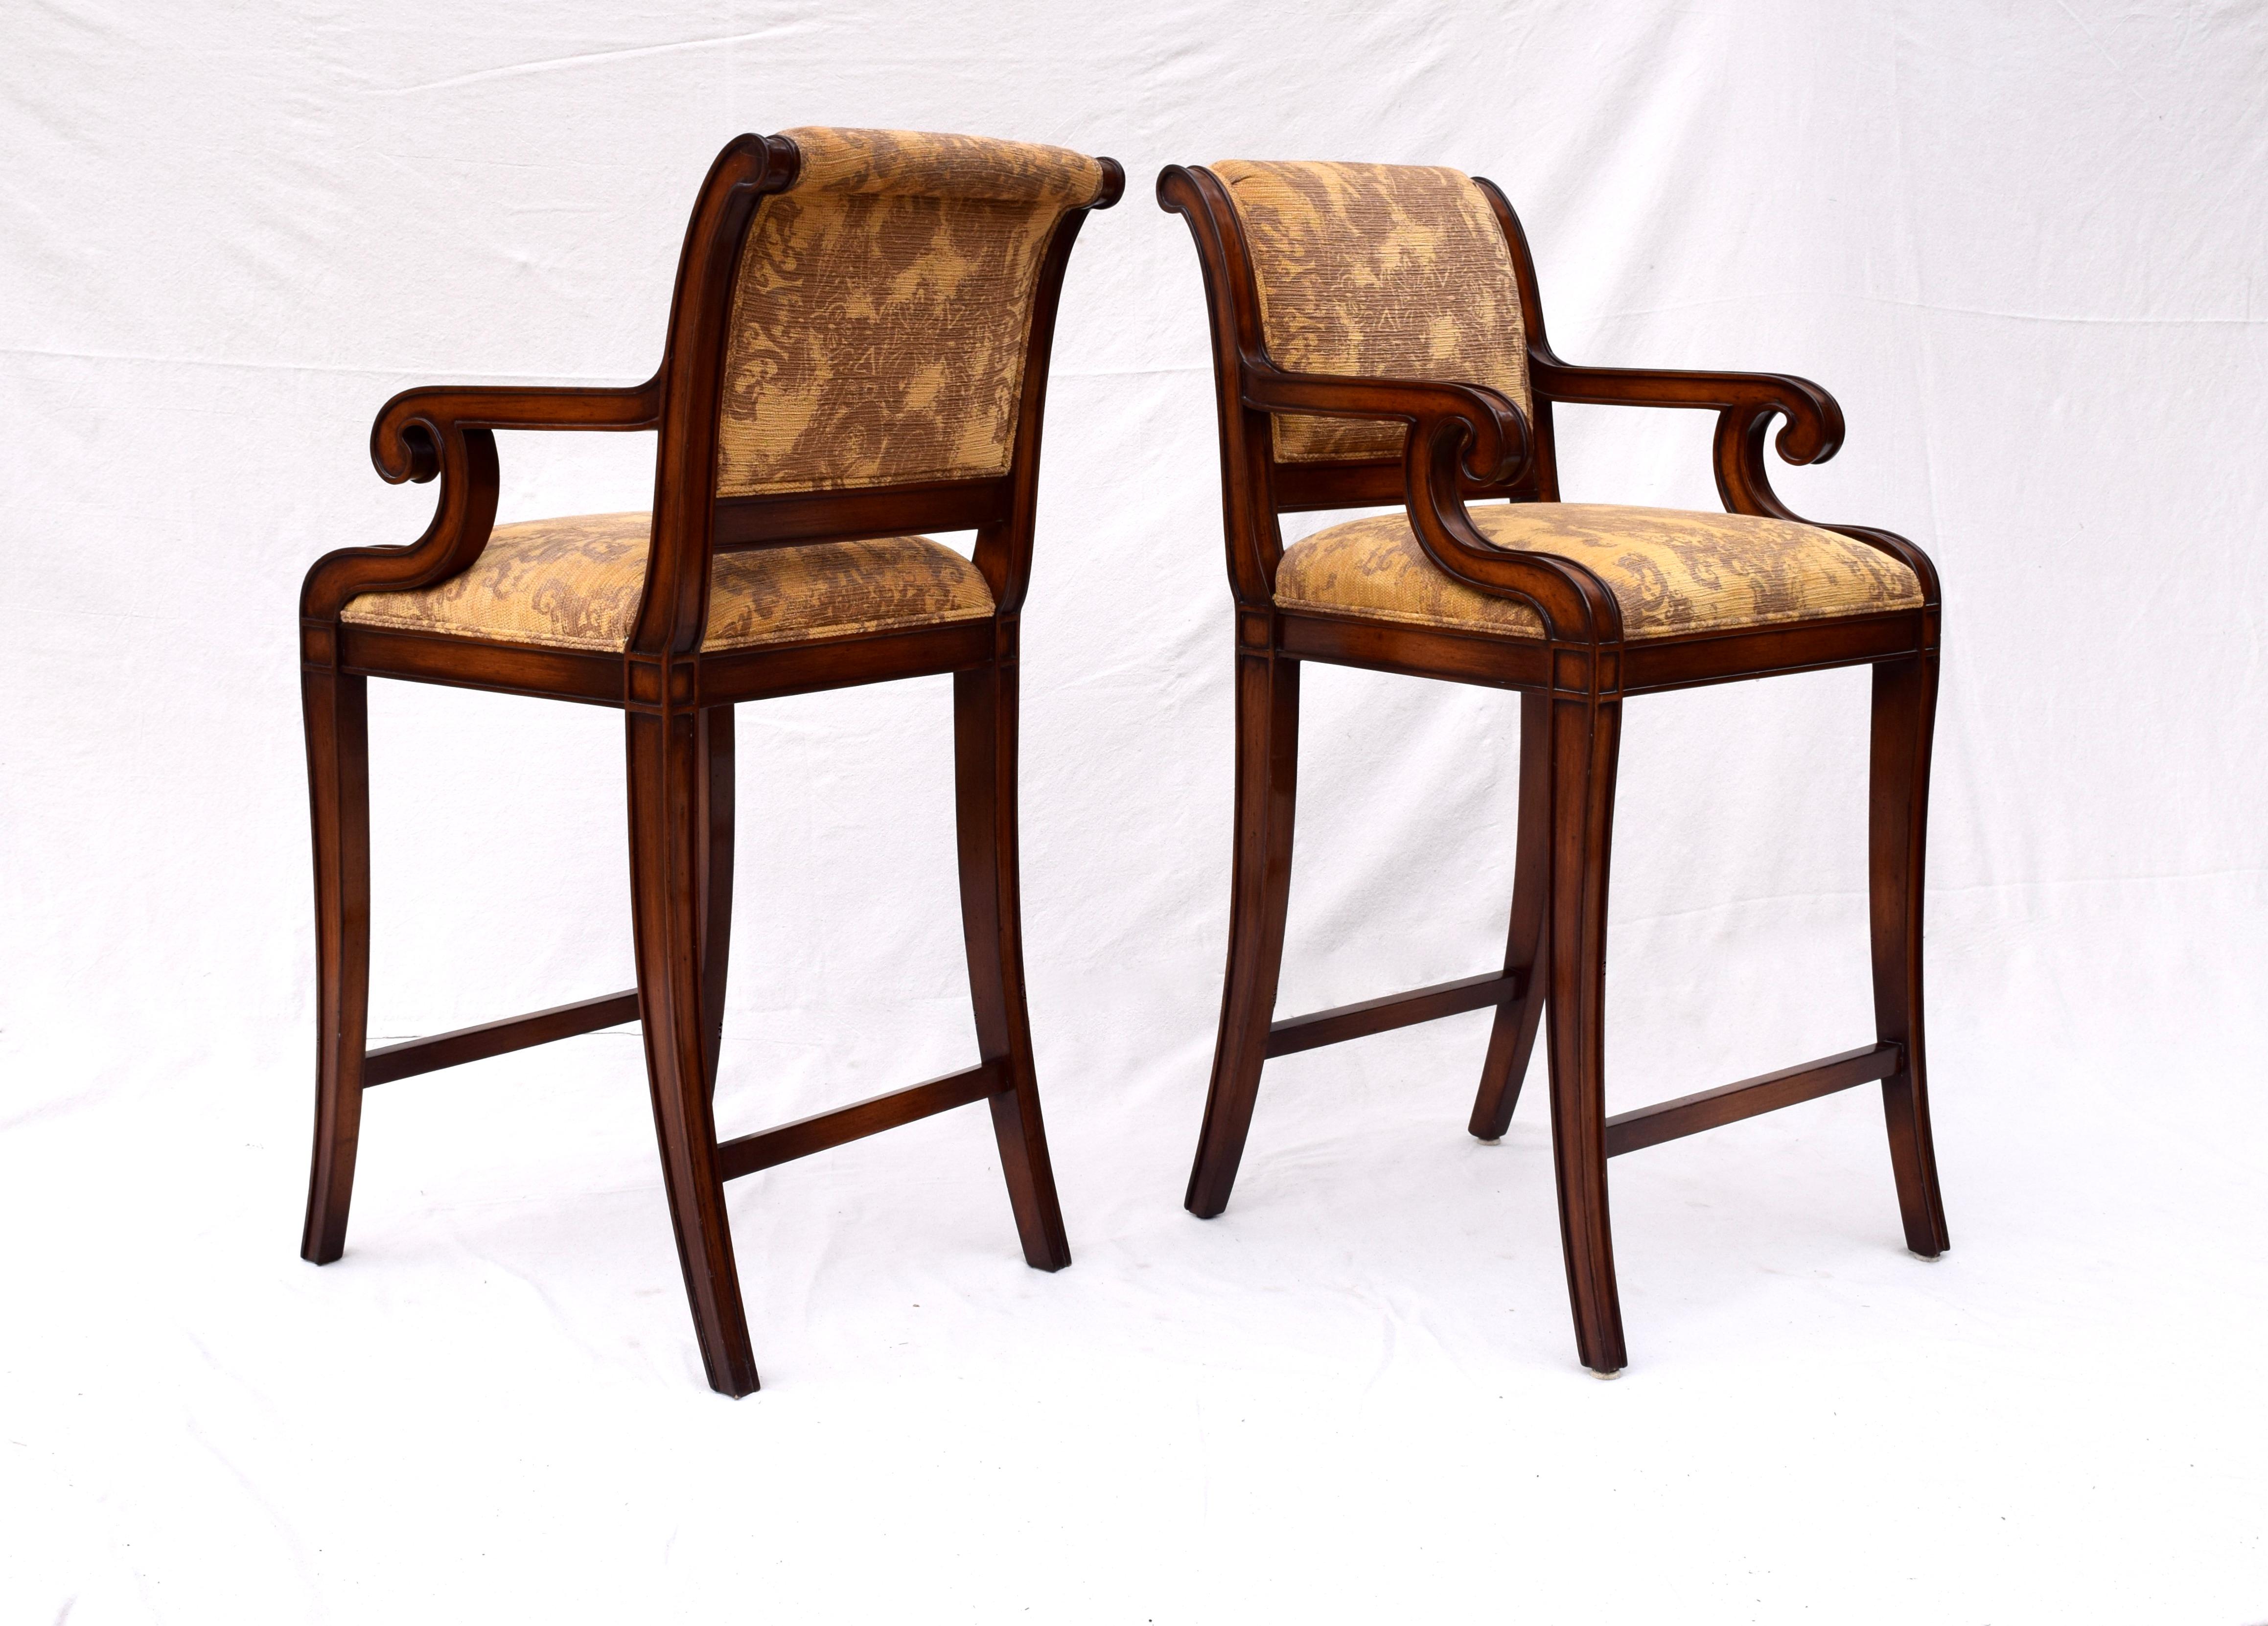 Contemporary Nancy Corzine Classic Regency Bar Stool Chairs, Pair For Sale